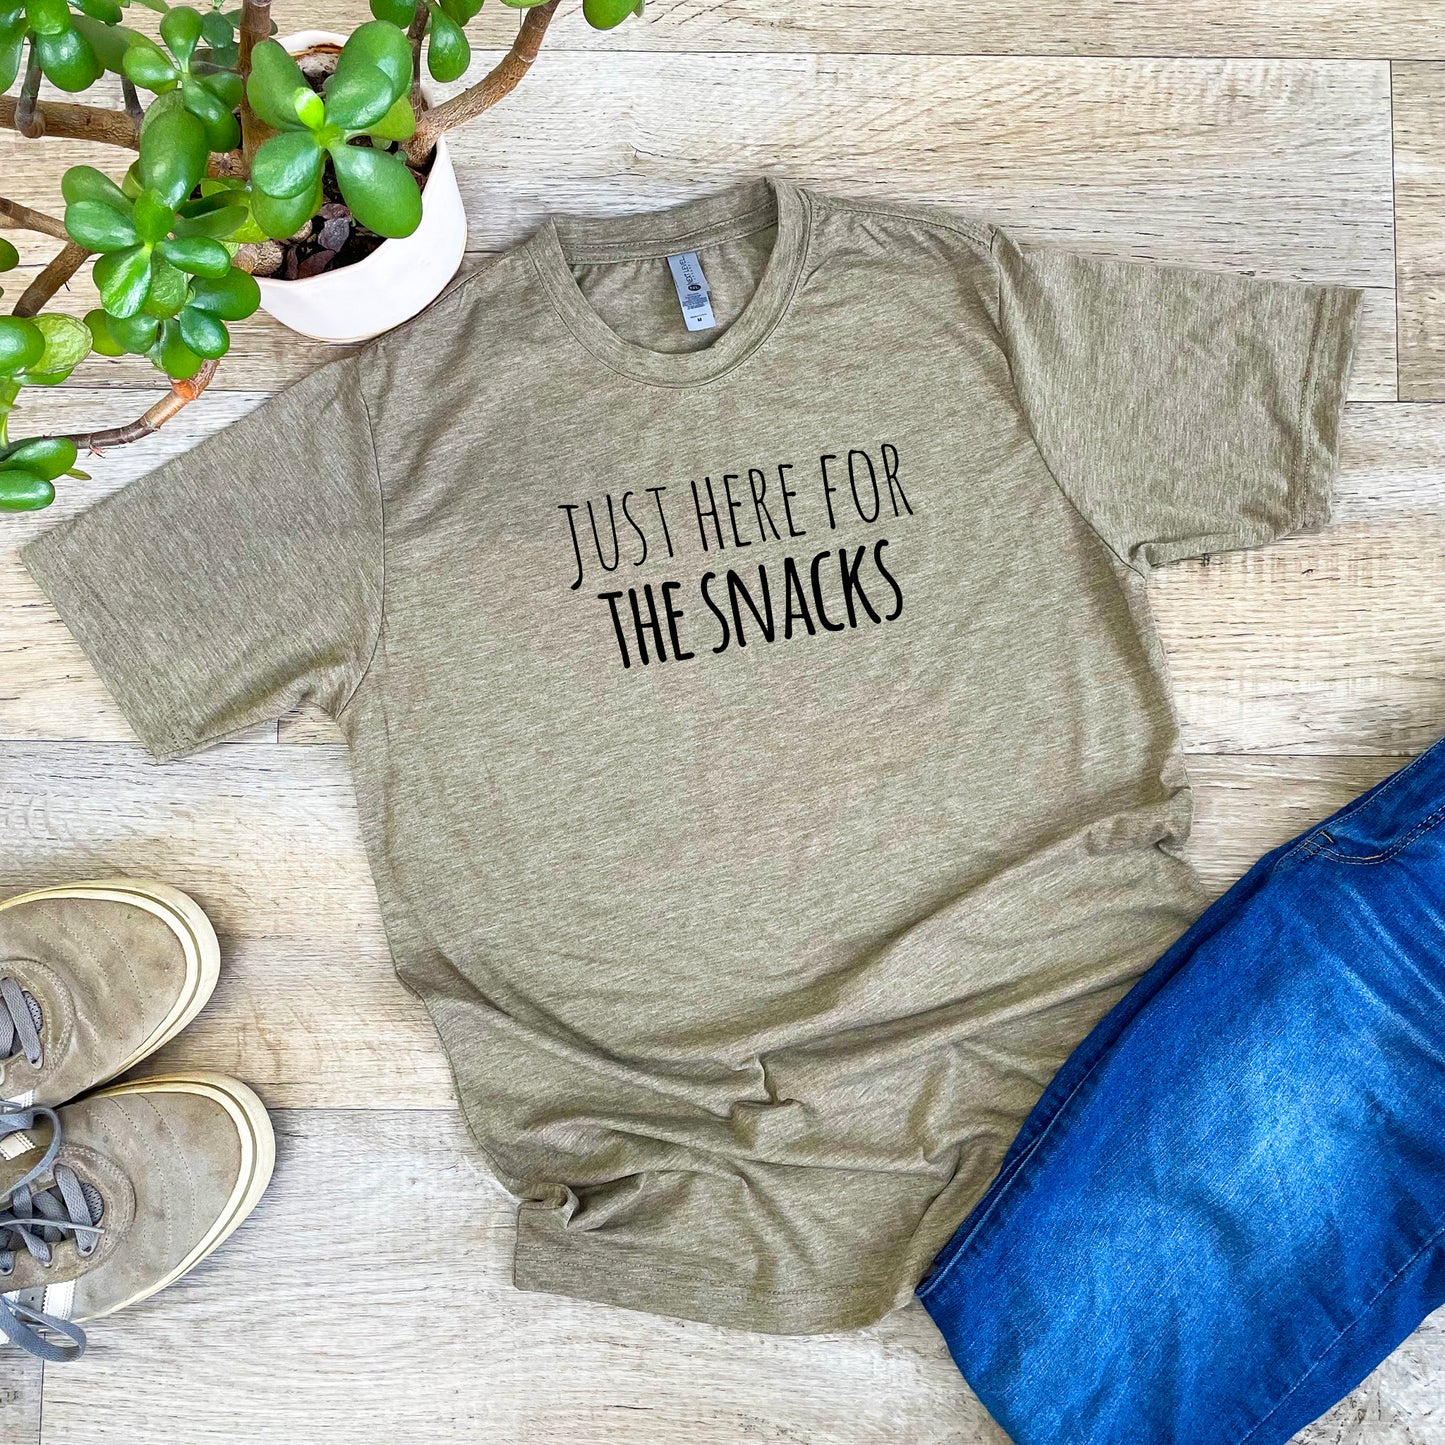 Just Here For The Snacks - Men's / Unisex Tee - Stonewash Blue or Sage